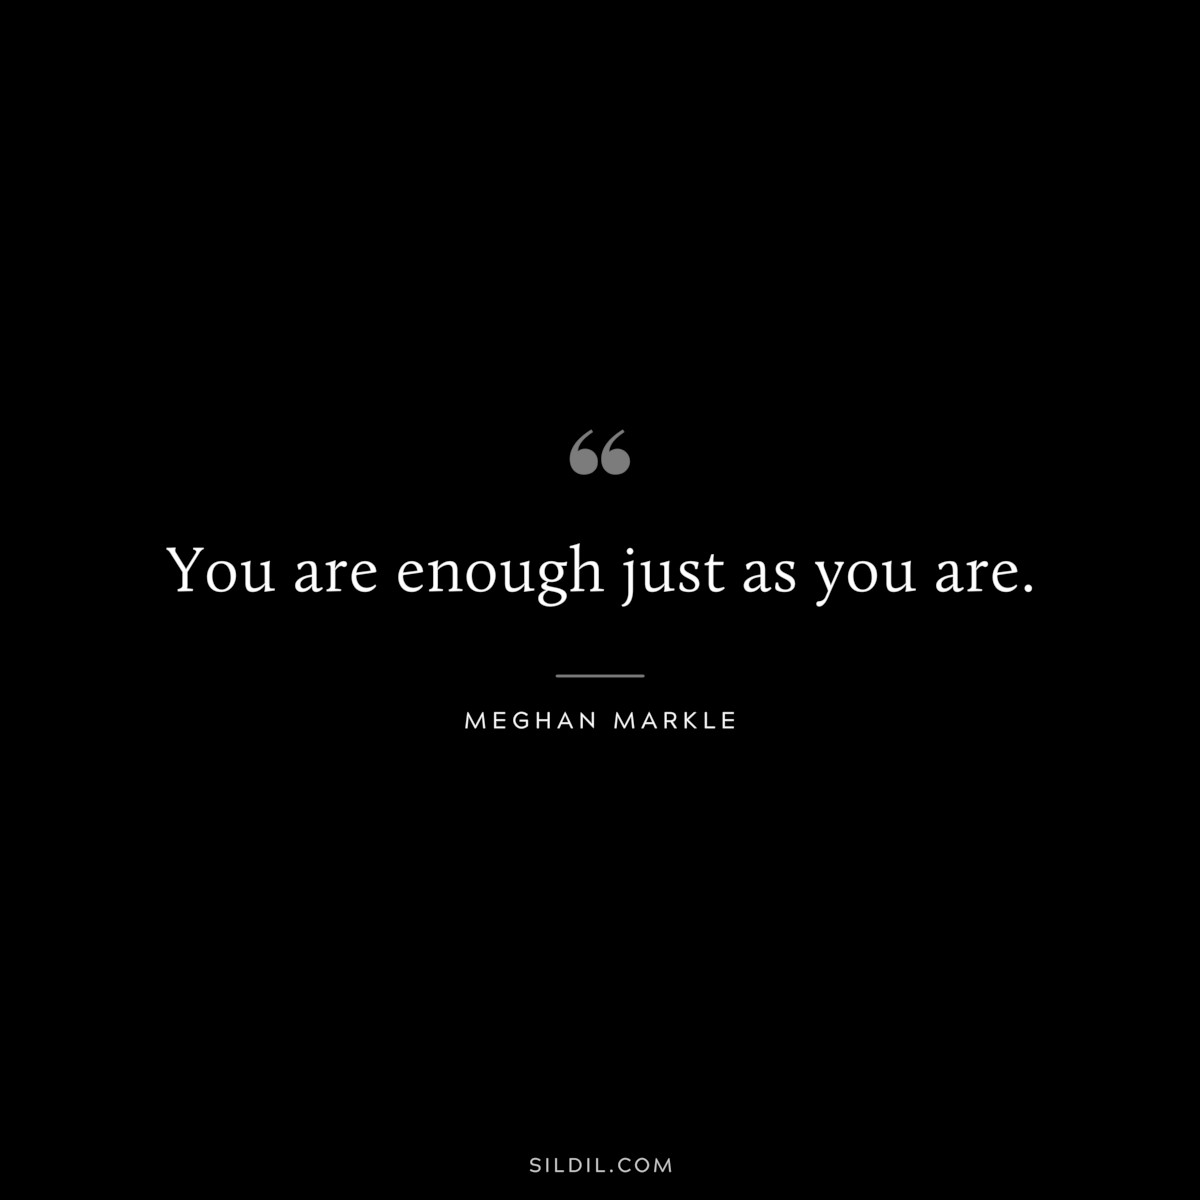 You are enough just as you are. ― Meghan Markle